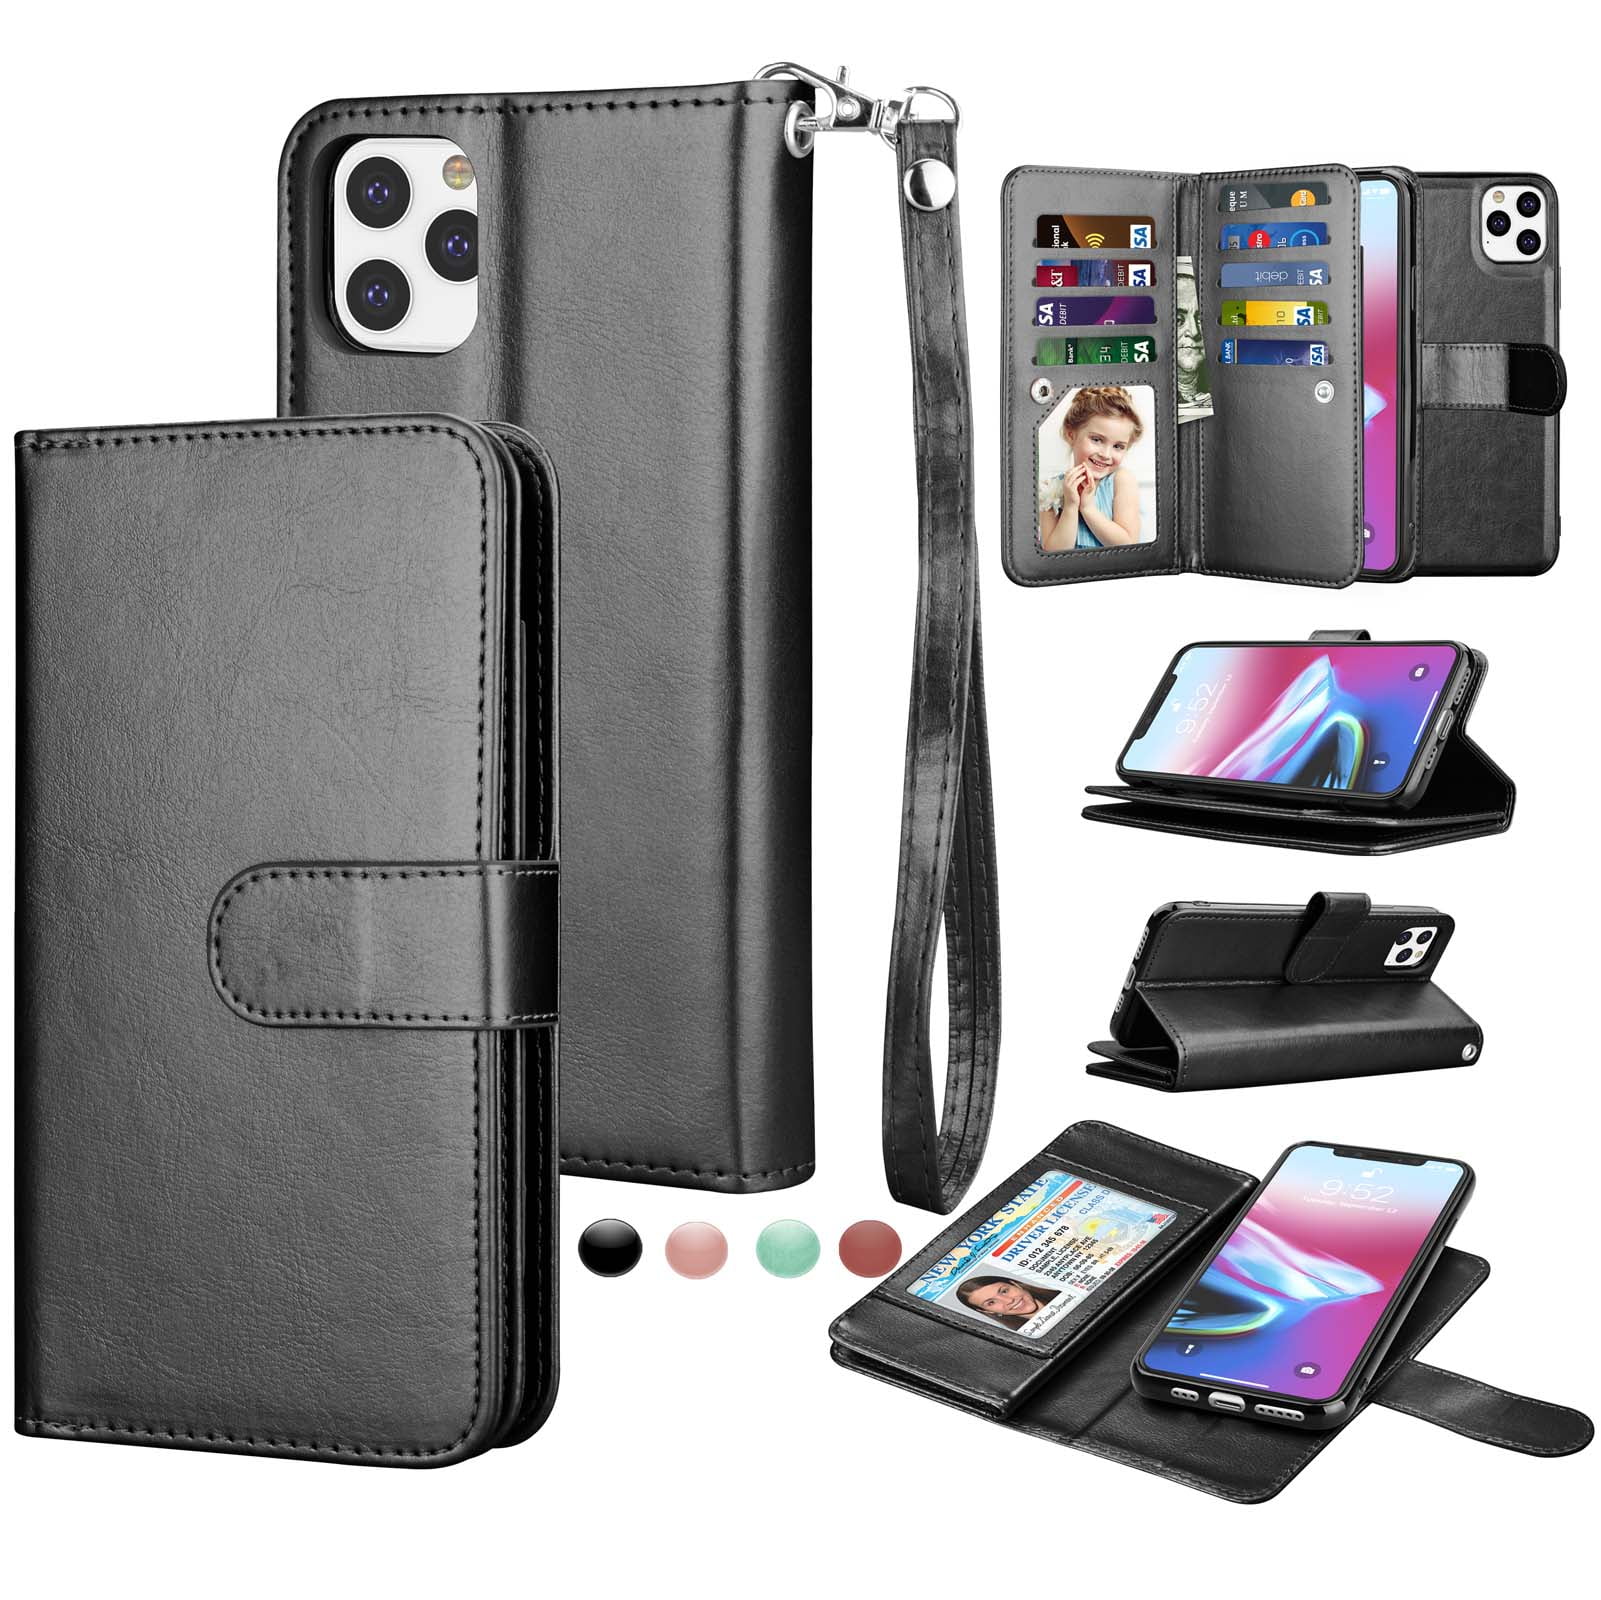 Kickstand Card Holders Premium Black Leather Cover Wallet for iPhone 11 Pro Max Flip Case Fit for iPhone 11 Pro Max 